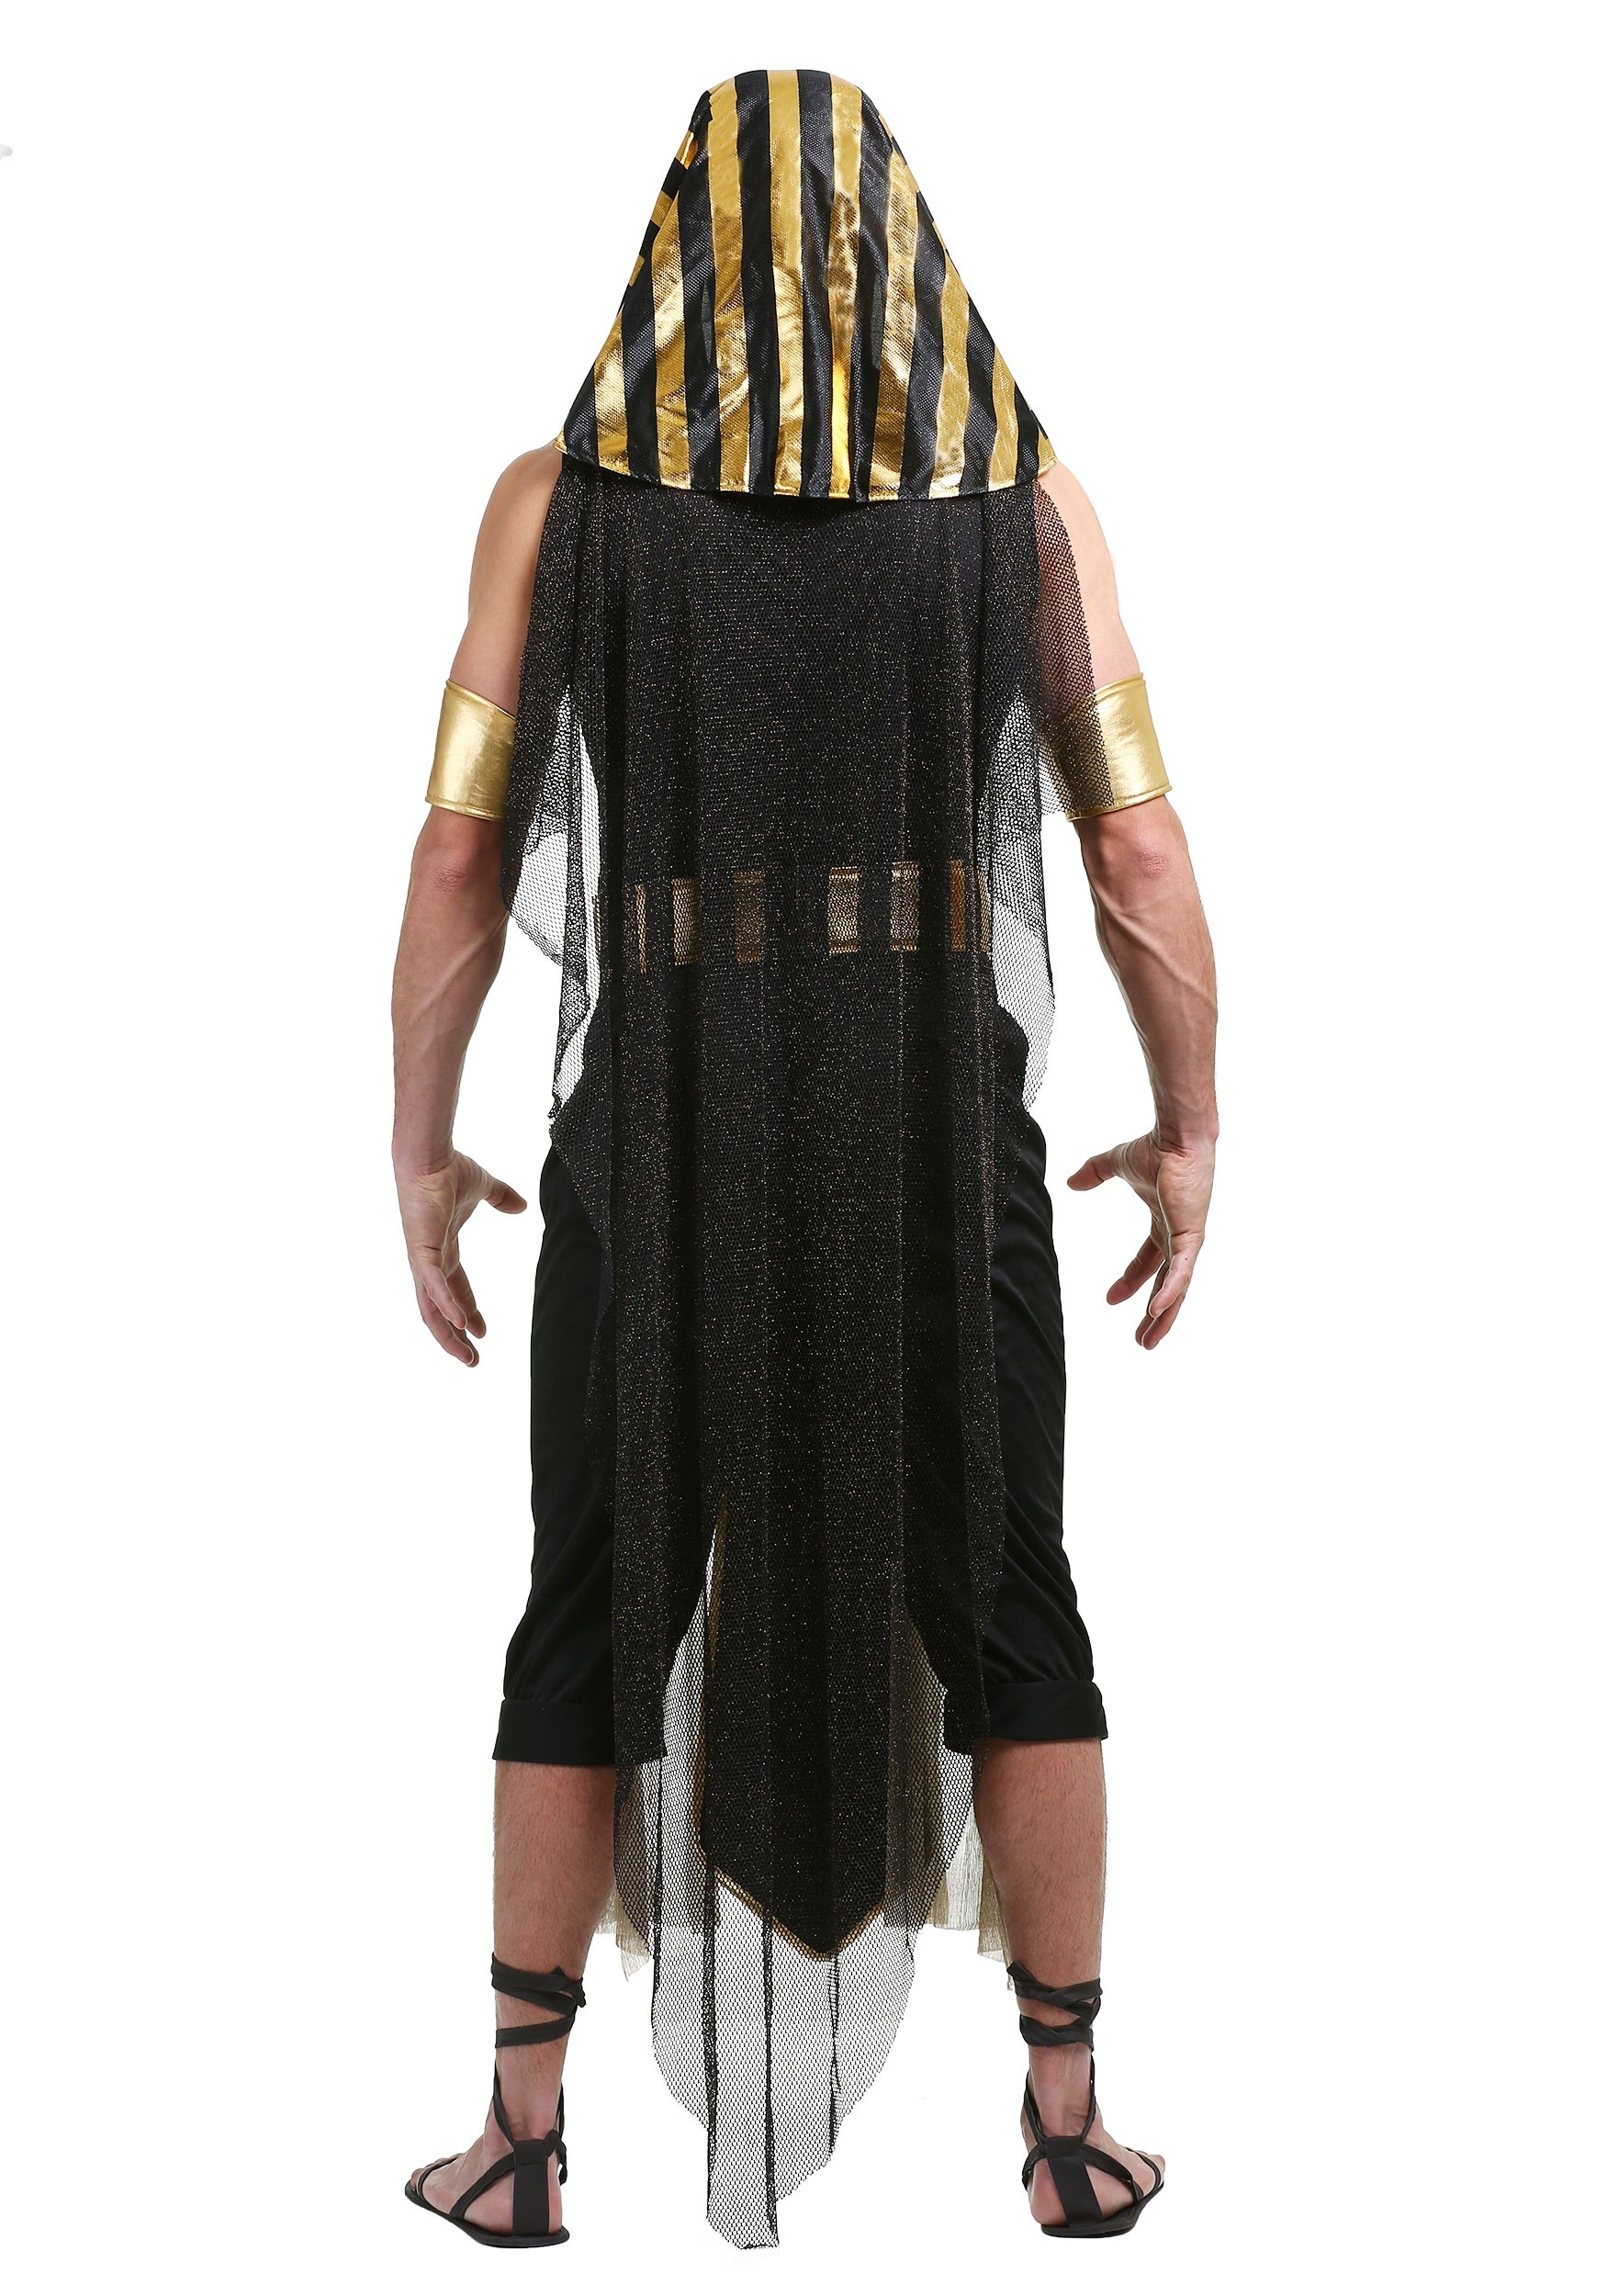 Plus Size All Powerful Pharaoh Costume